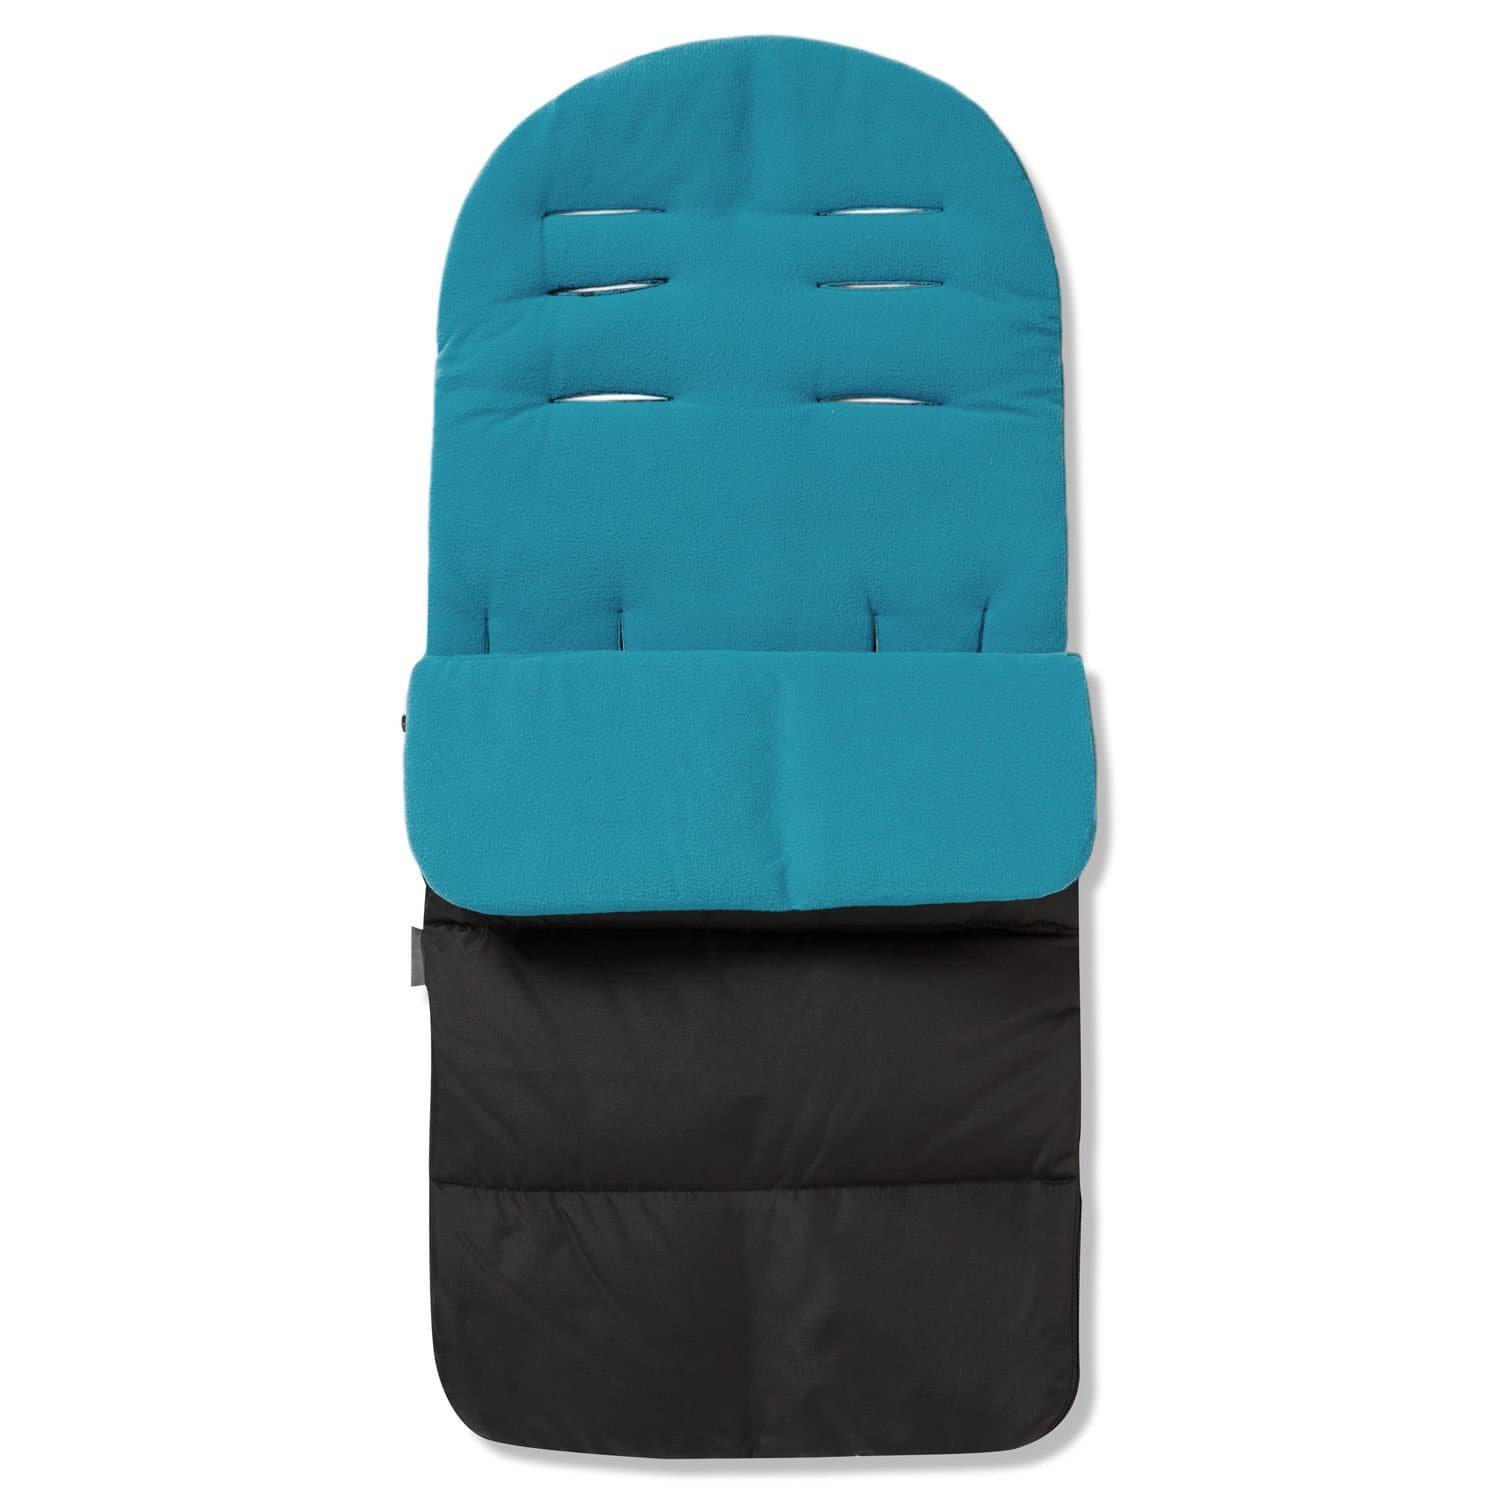 Premium Footmuff / Cosy Toes Compatible with Hartan - Ocean Blue / Fits All Models | For Your Little One